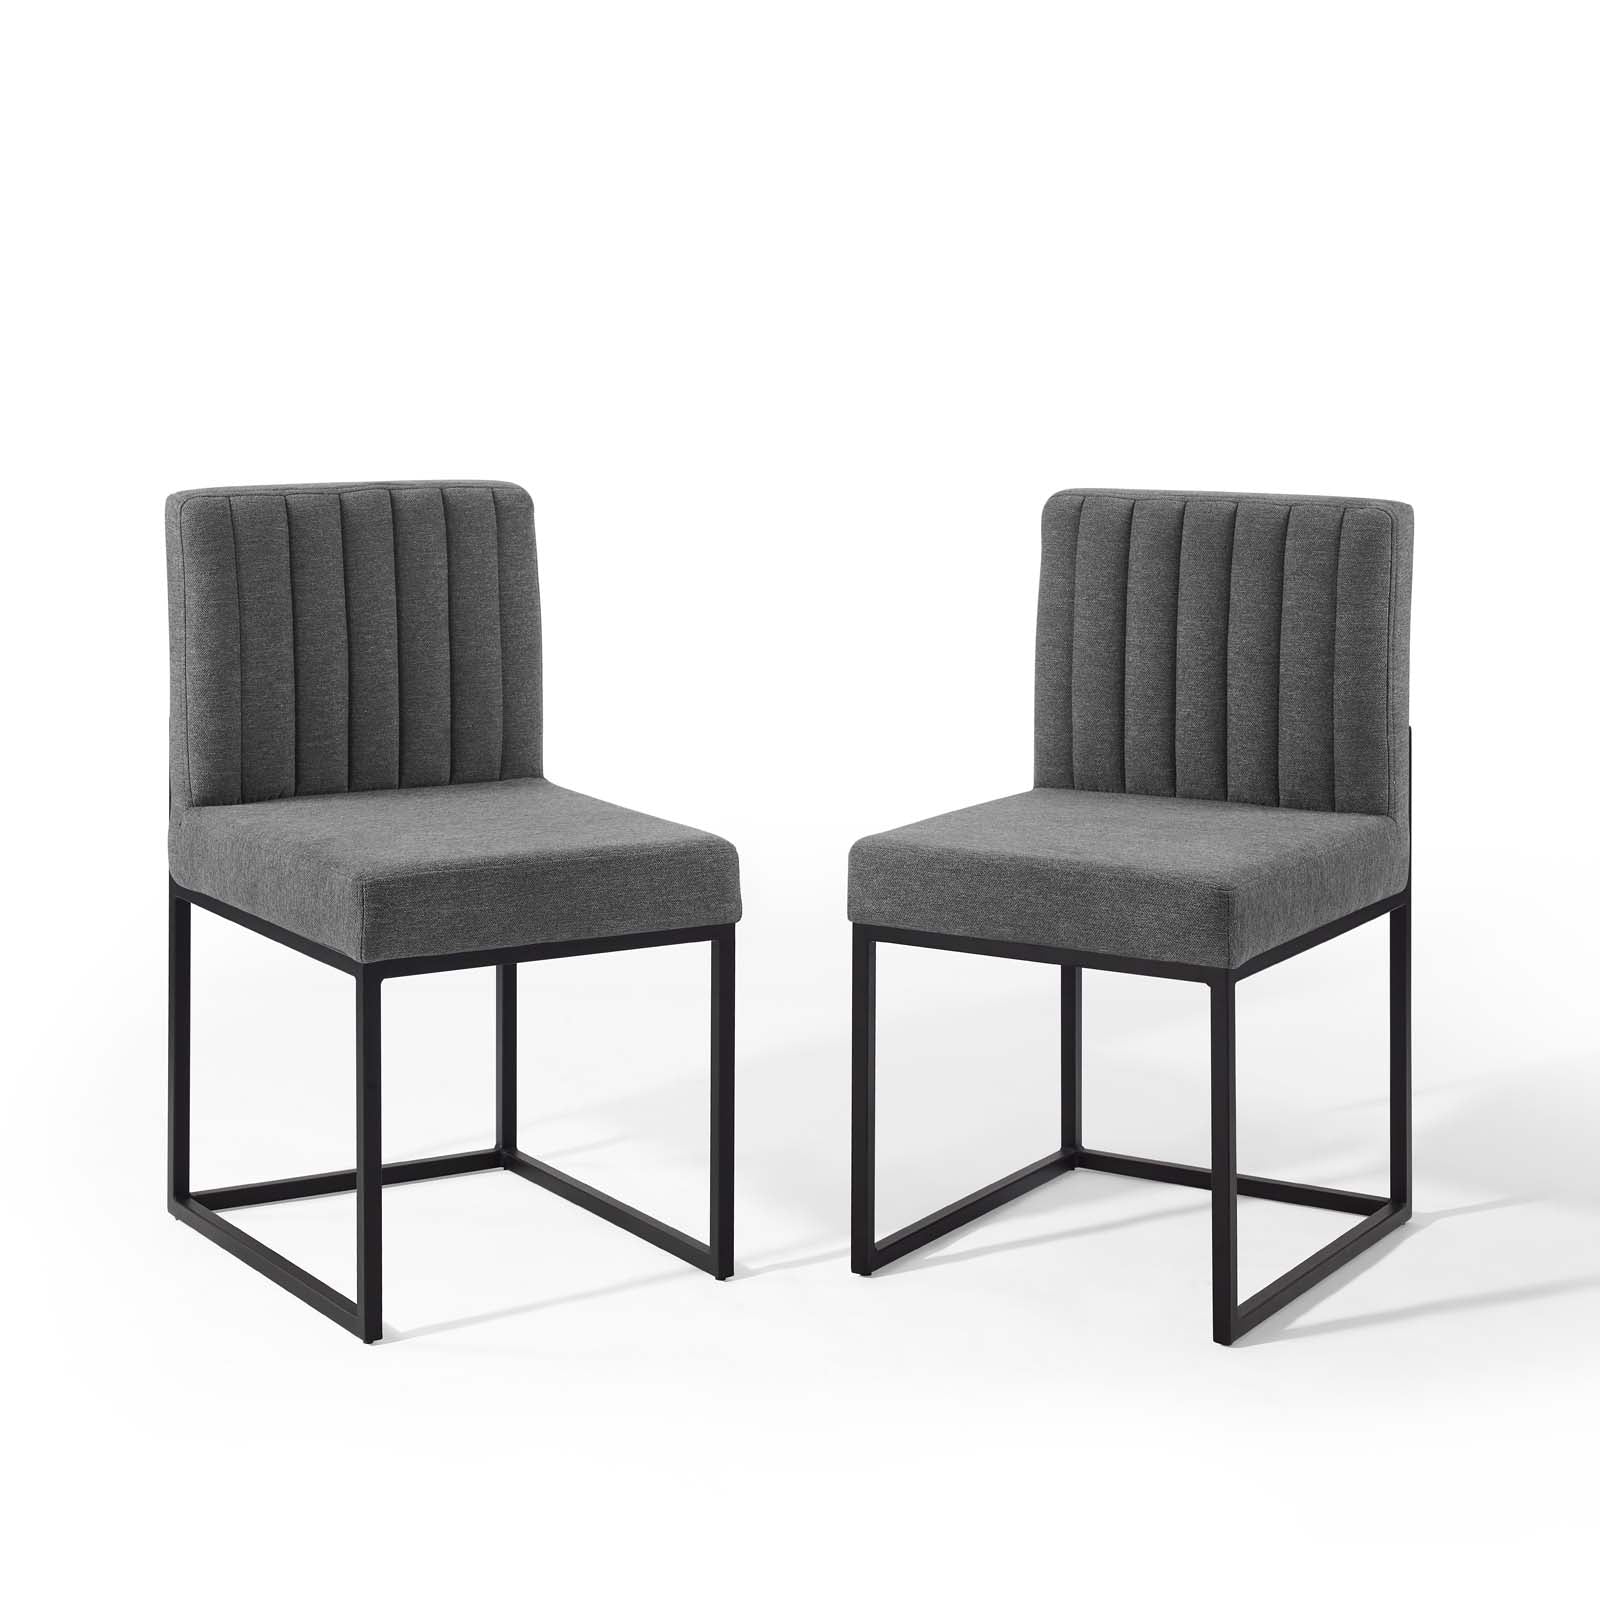 Modway Dining Chairs - Carriage Dining Chair Upholstered Fabric Set of 2 Black Charcoal